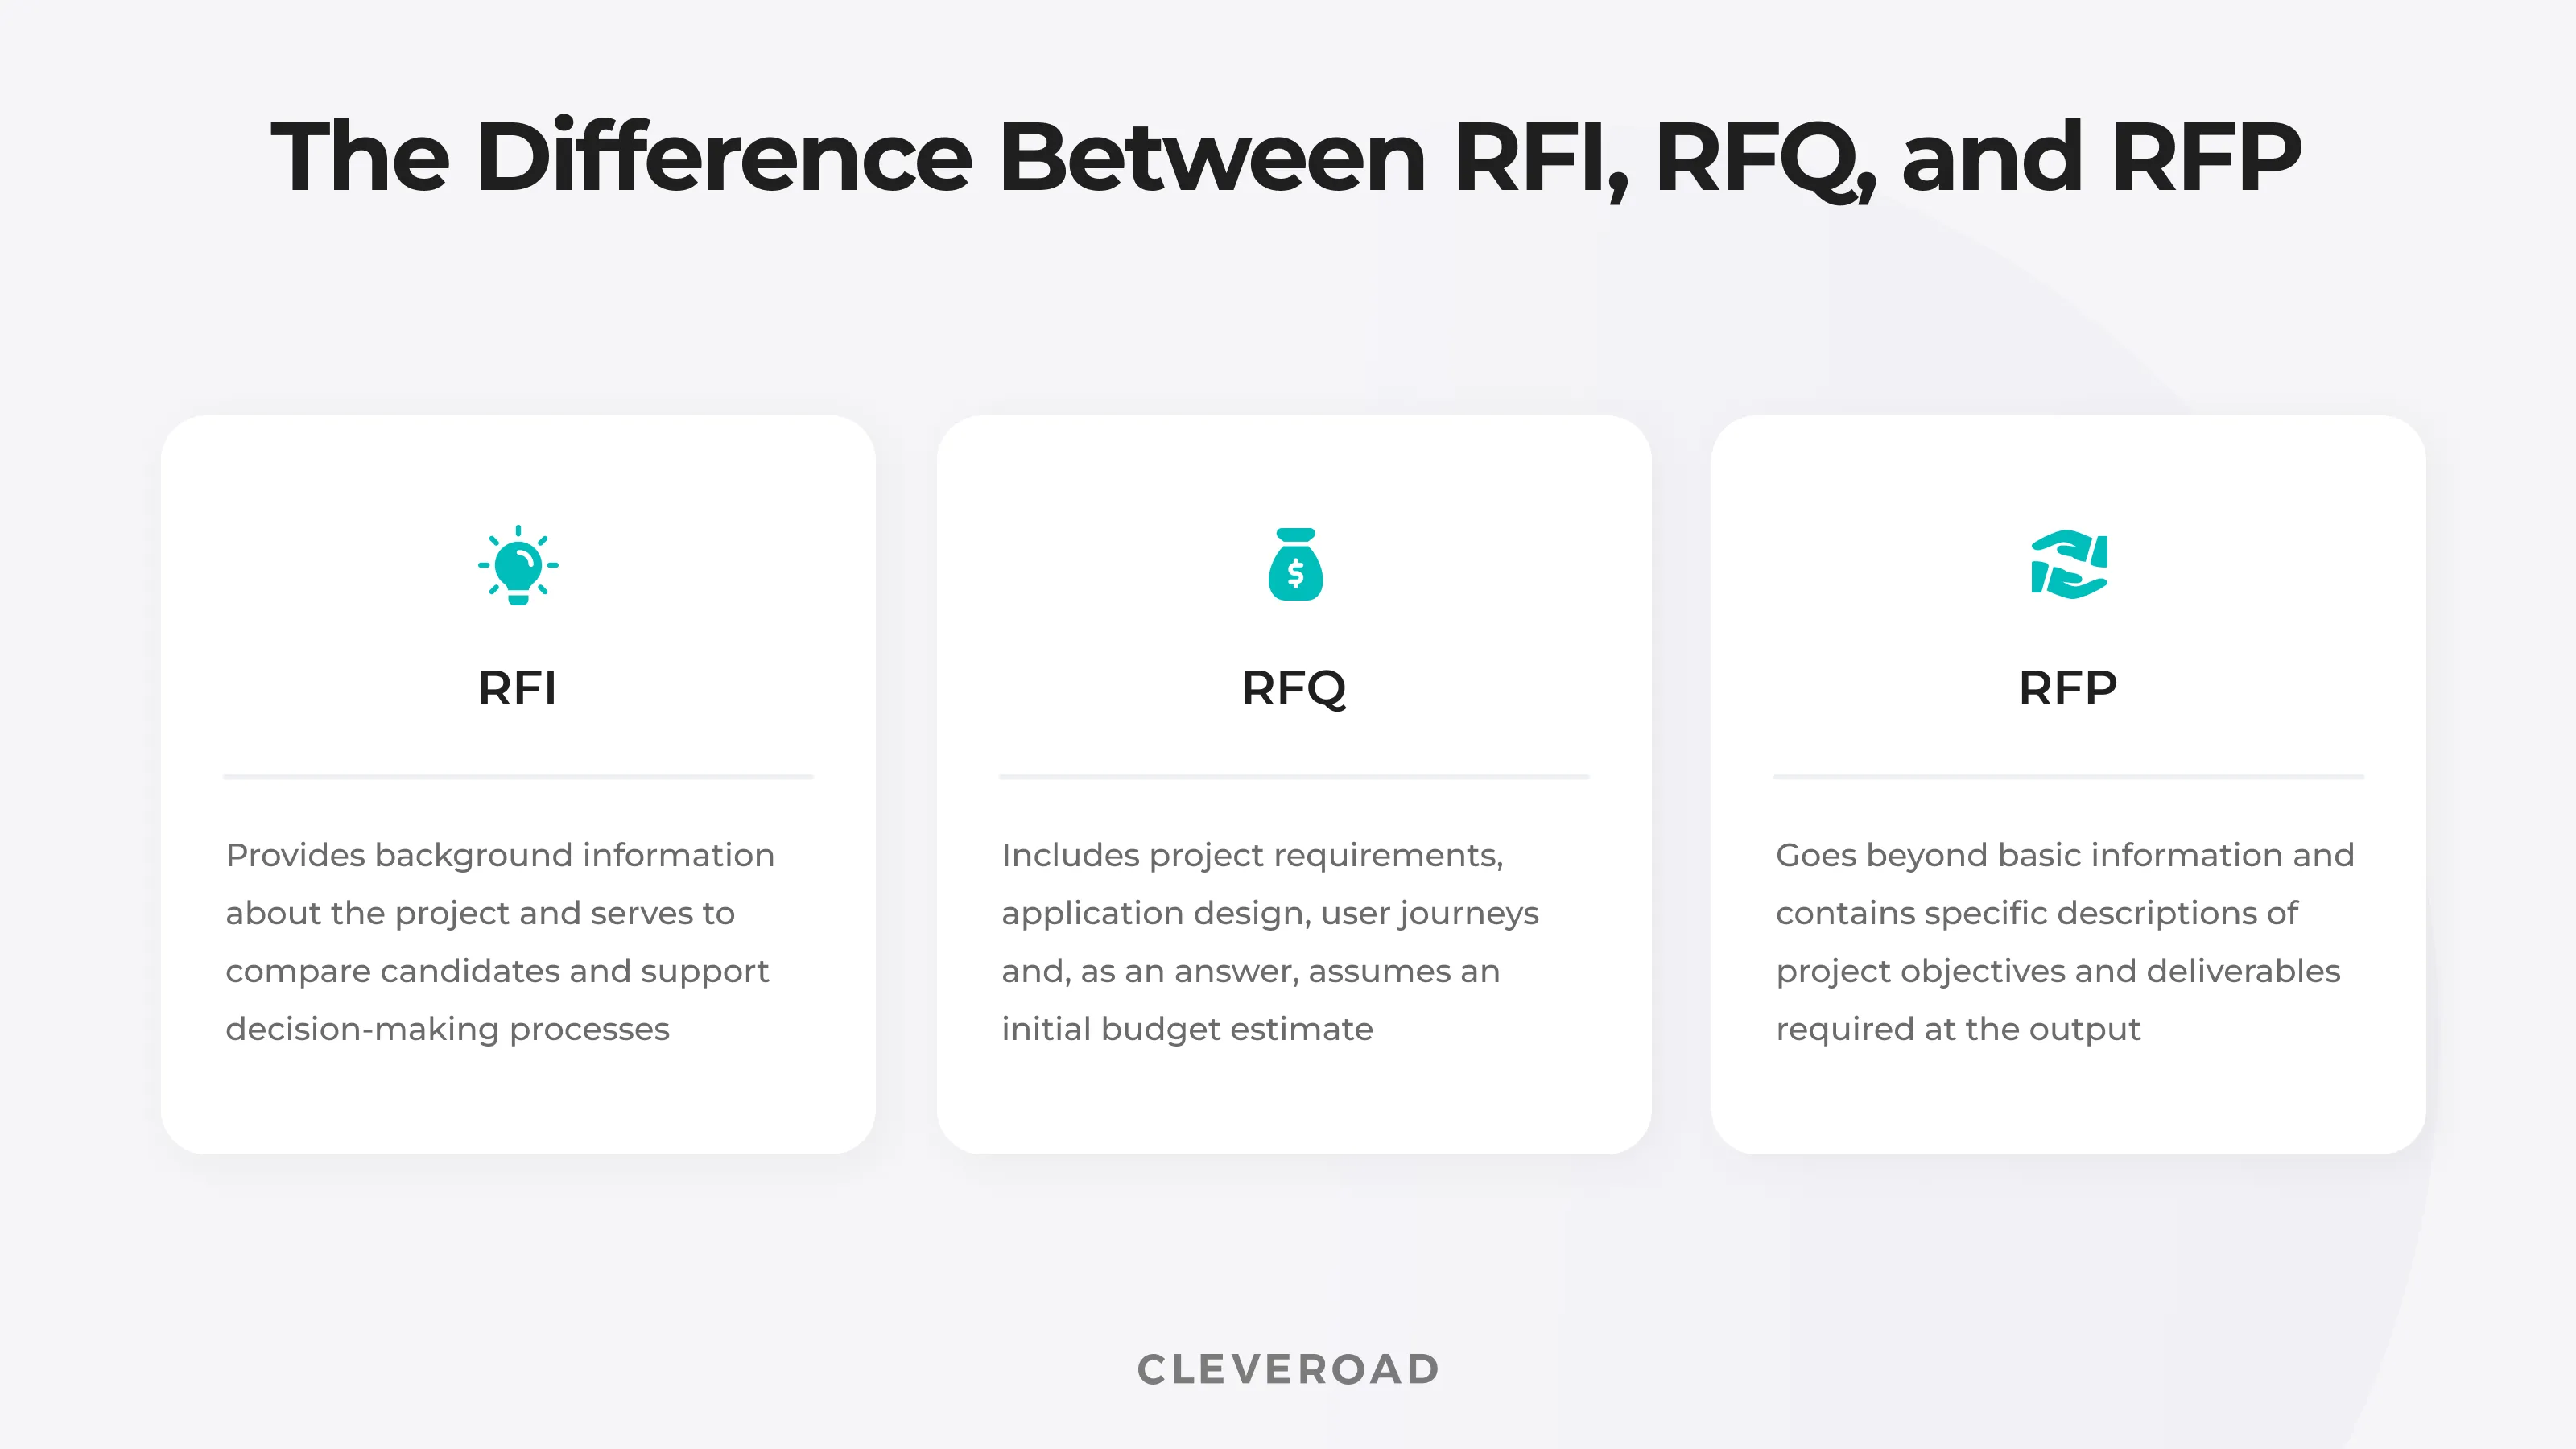 The difference between RFI, RFQ, and RFP